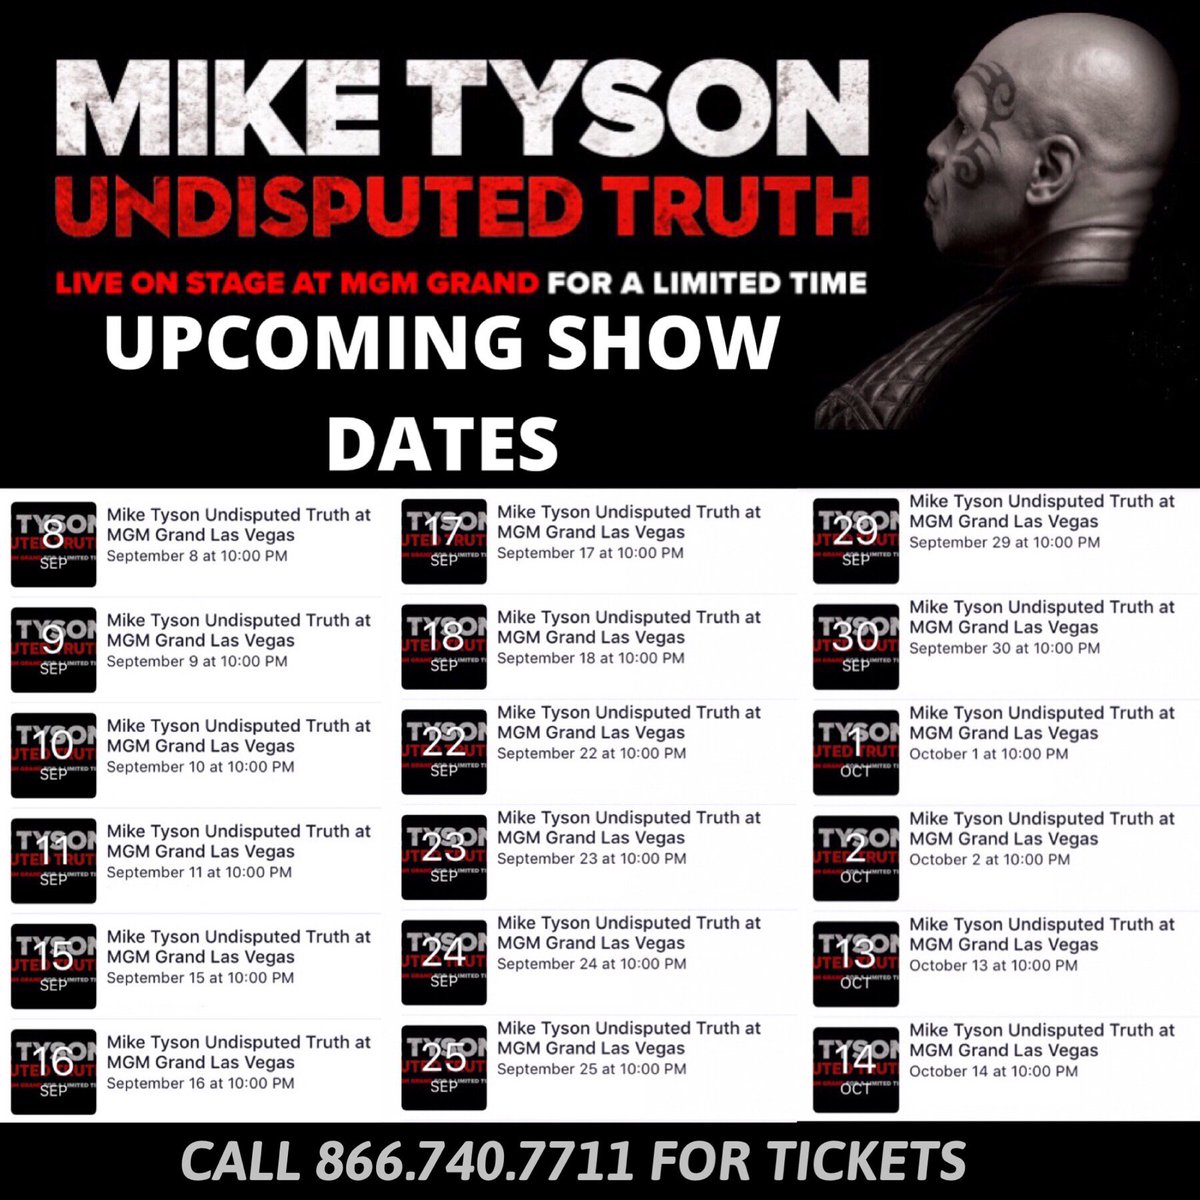 #Subscribe to the #MikeTyson #UndisputedTruth events page on #Facebook to learn new dates. https://t.co/x55qBcyRLf https://t.co/i9eejk37H6